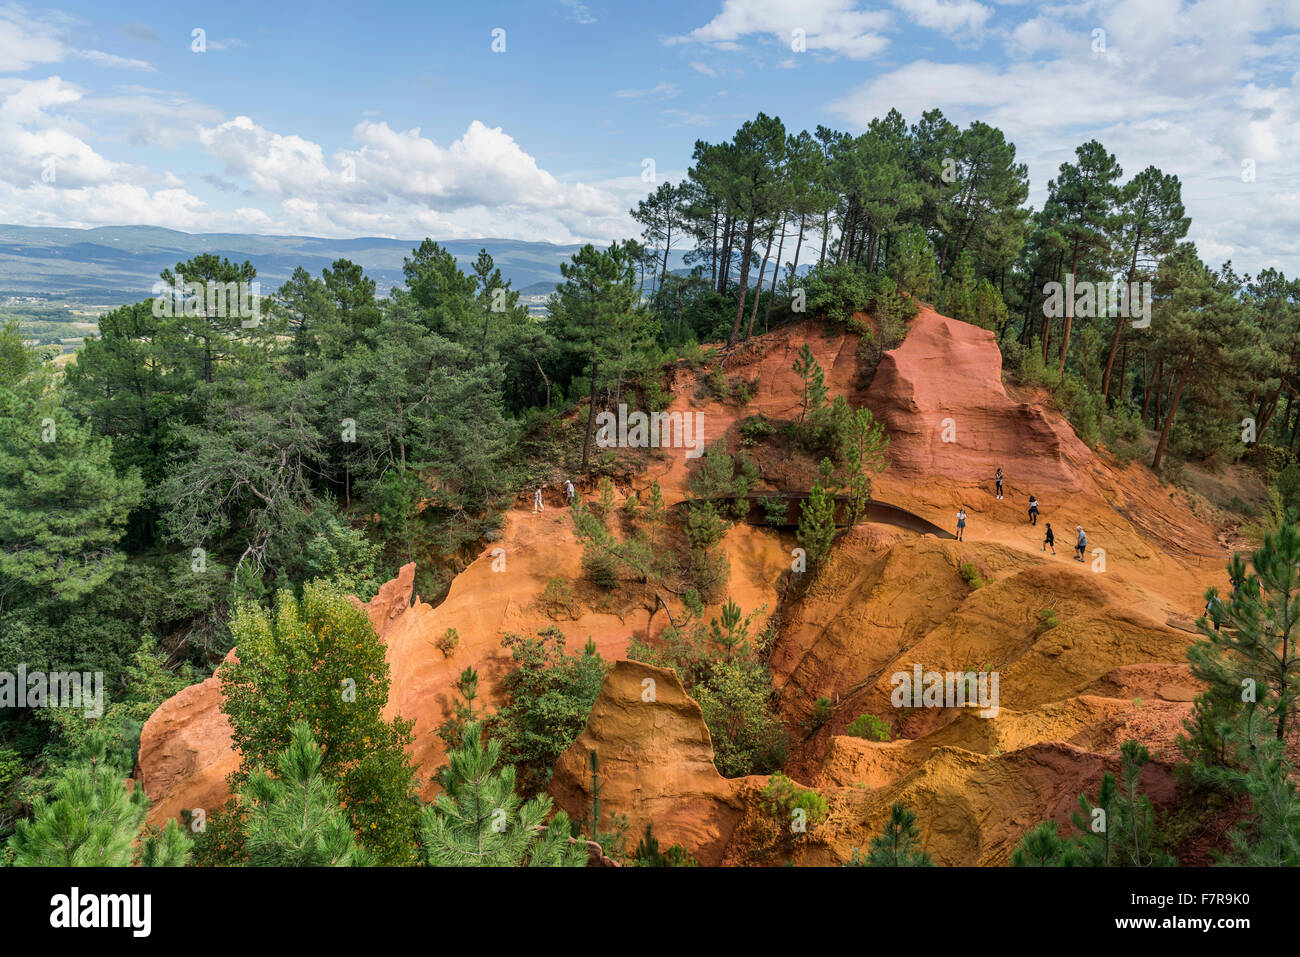 France, Vaucluse, Roussillon village (Luberon region), one of the Most Beautiful Village of France, Le Sentier des Ocres, Ochre Stock Photo